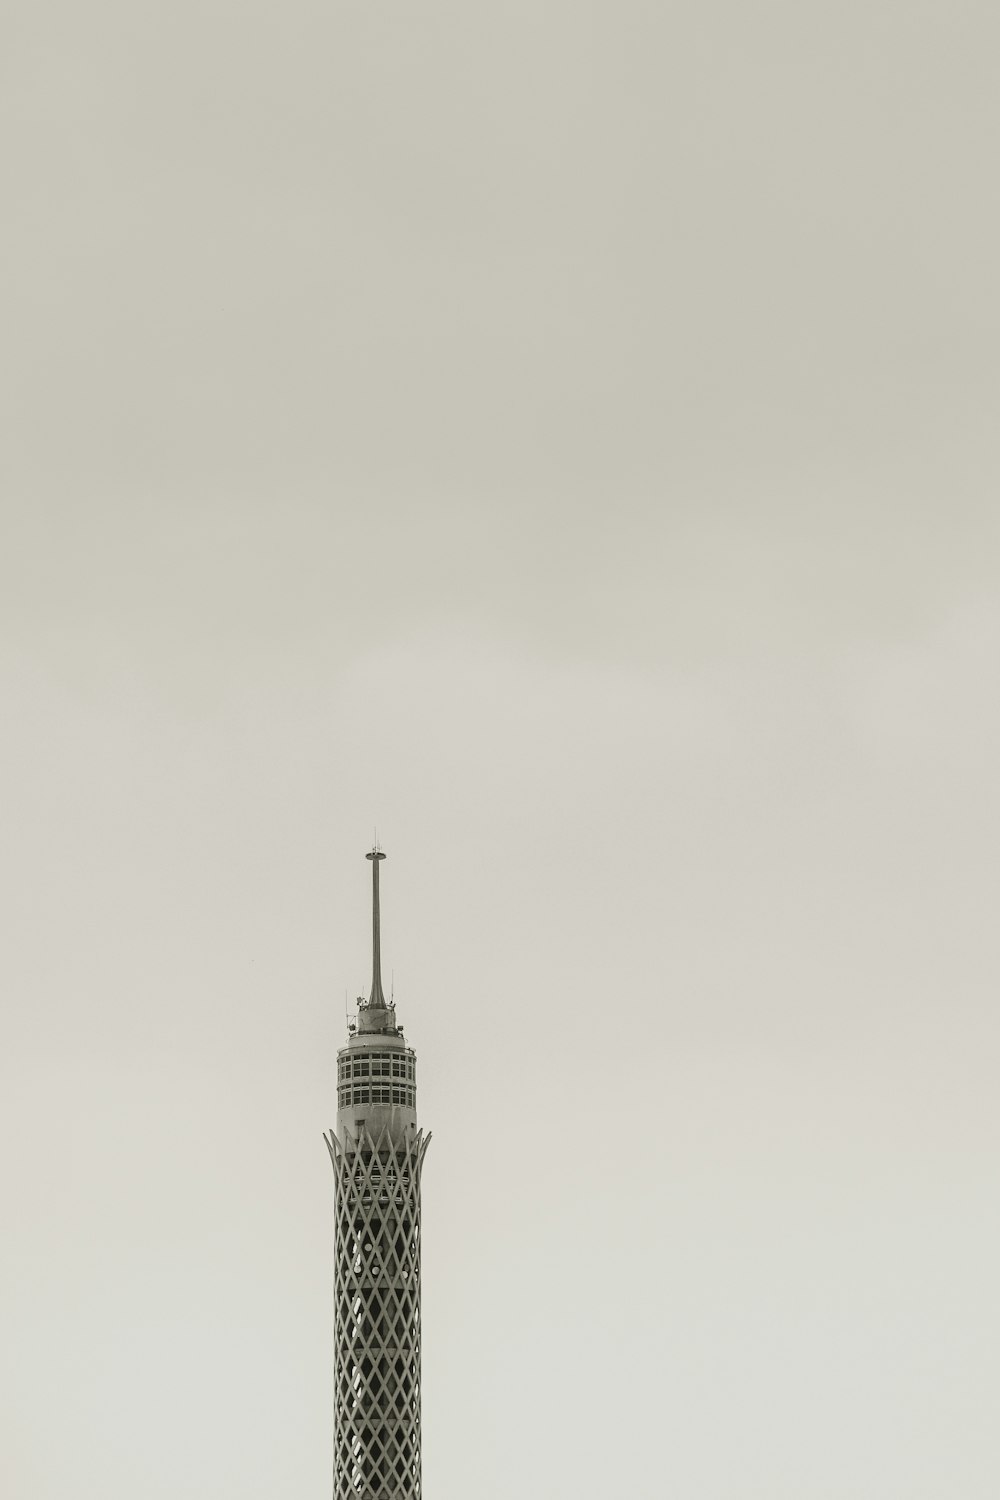 gray concrete tower under white sky during daytime